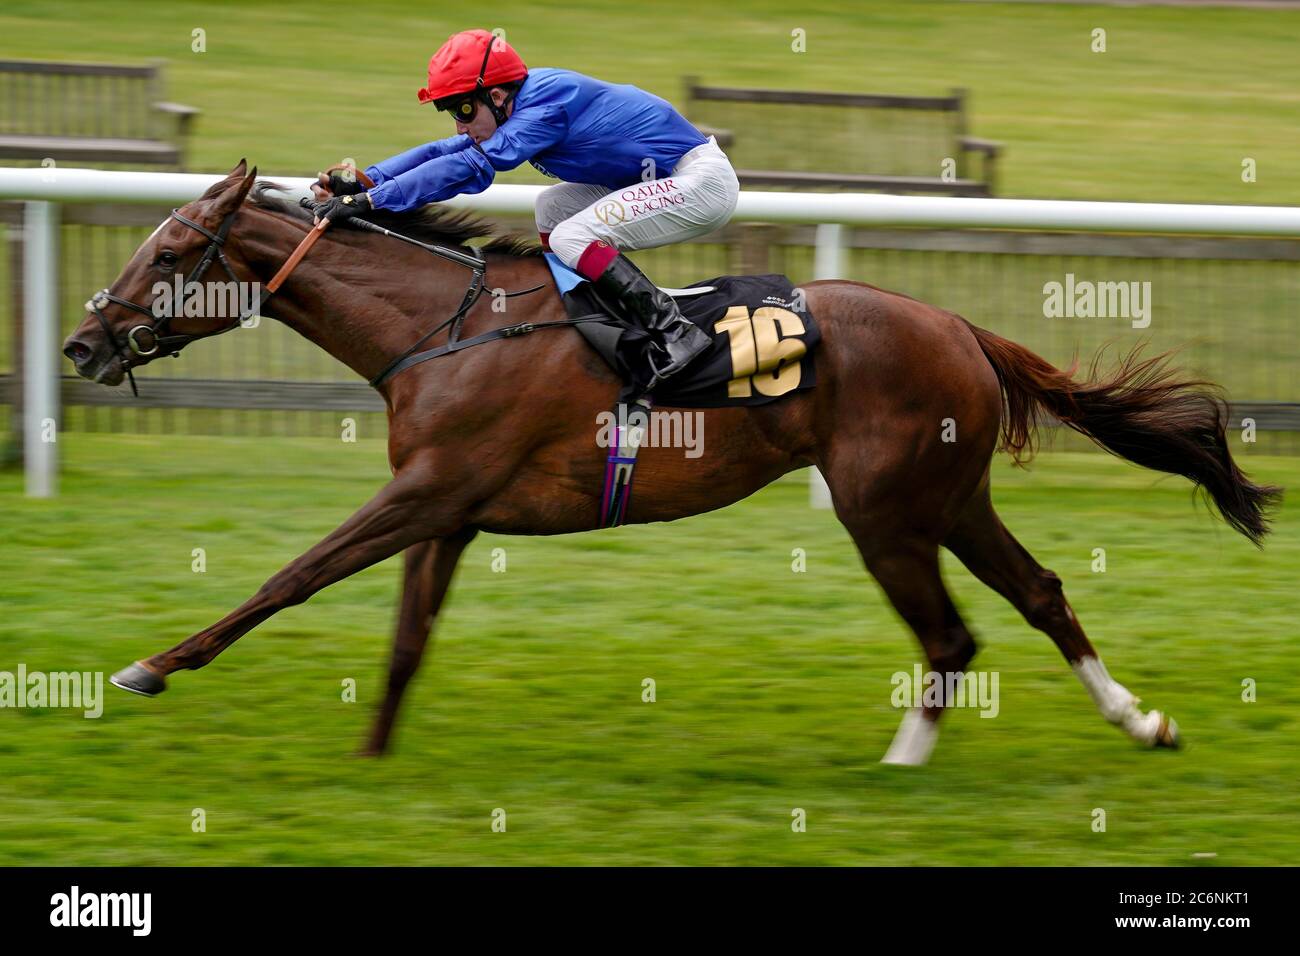 Jockey Oisin Murphy riding Stunning Beauty to win The bet365 Novice Stakes on day three of The Moet and Chandon July Festival at Newmarket Racecourse. Stock Photo